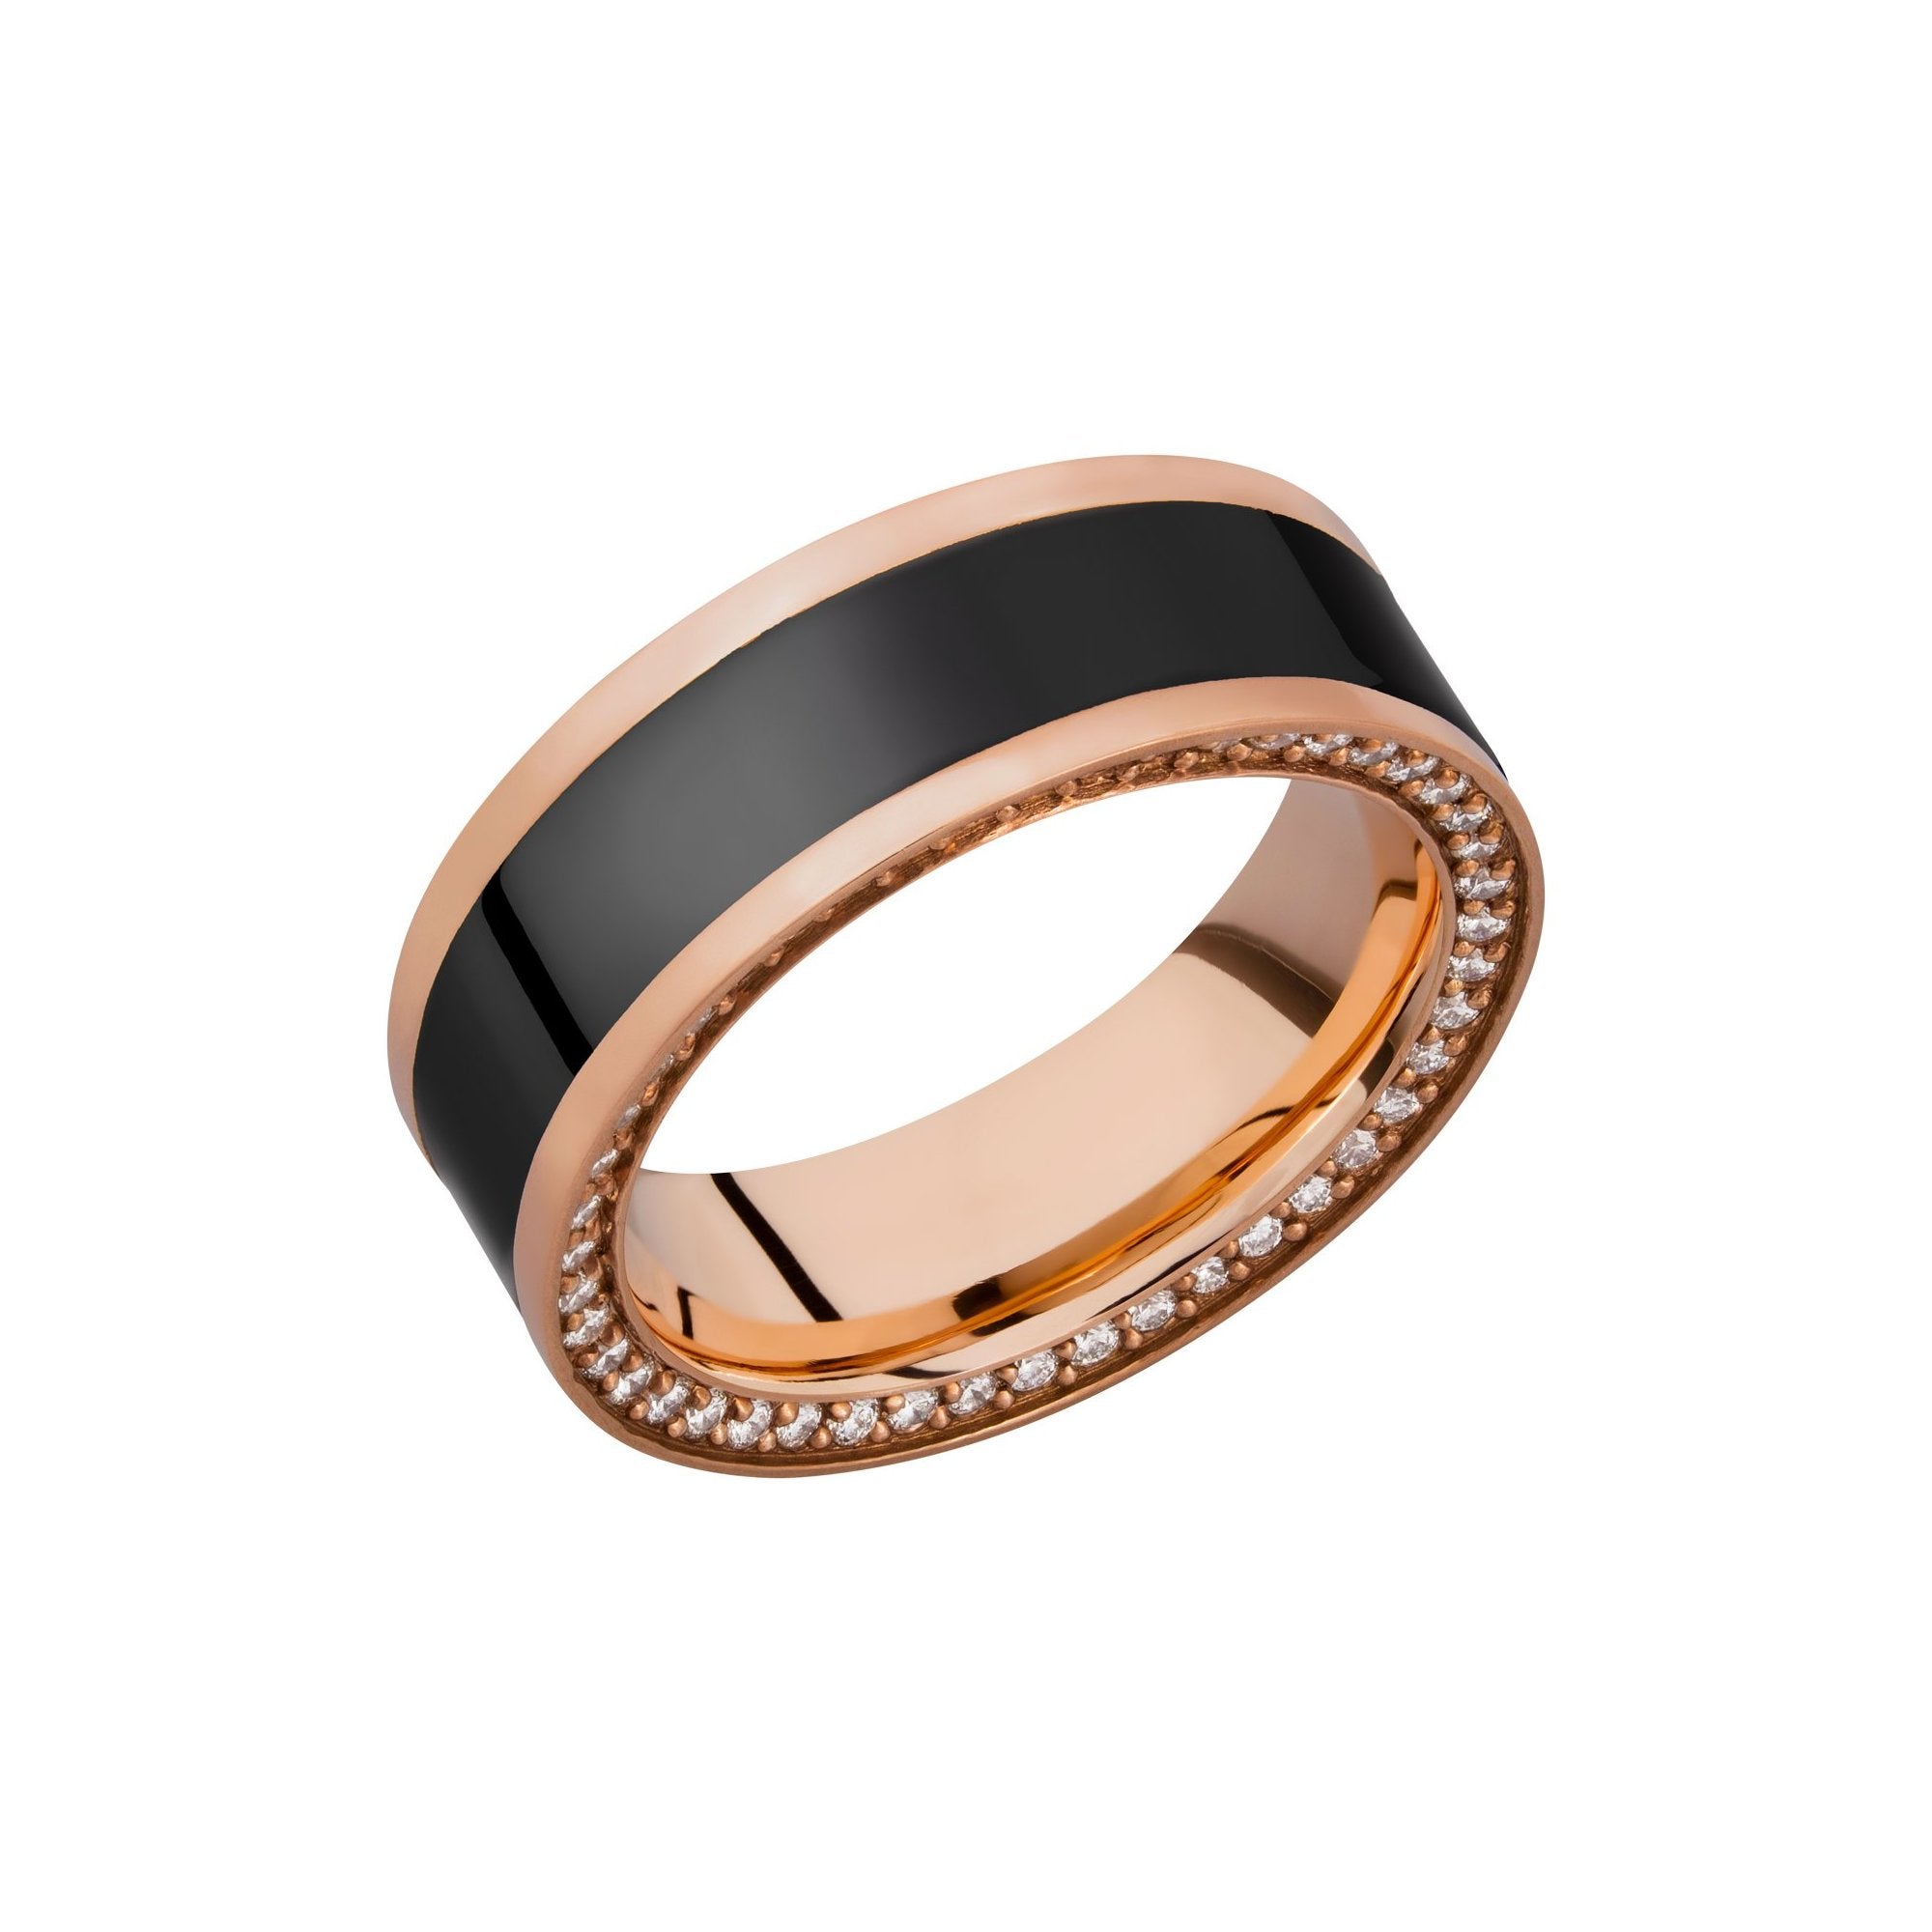 Zeus 18k Rose Gold Band with Elysium Black Diamond Inlay and a Reverse Diamond Bevel - Talisman Collection Fine Jewelers